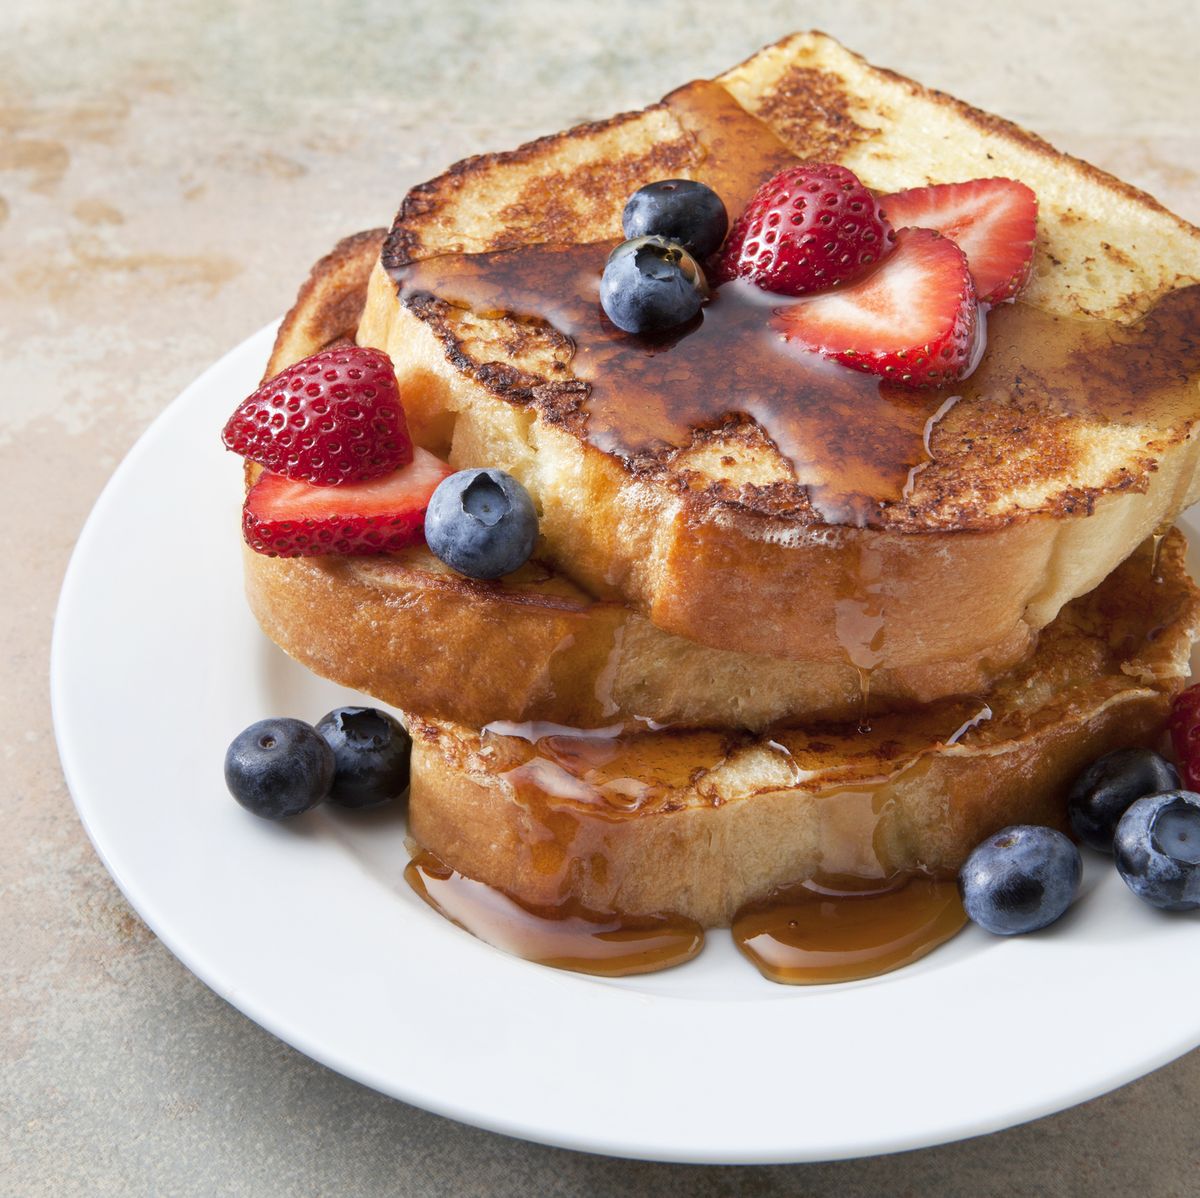 Challah french toast waffle! Giving a classic a twist by using the